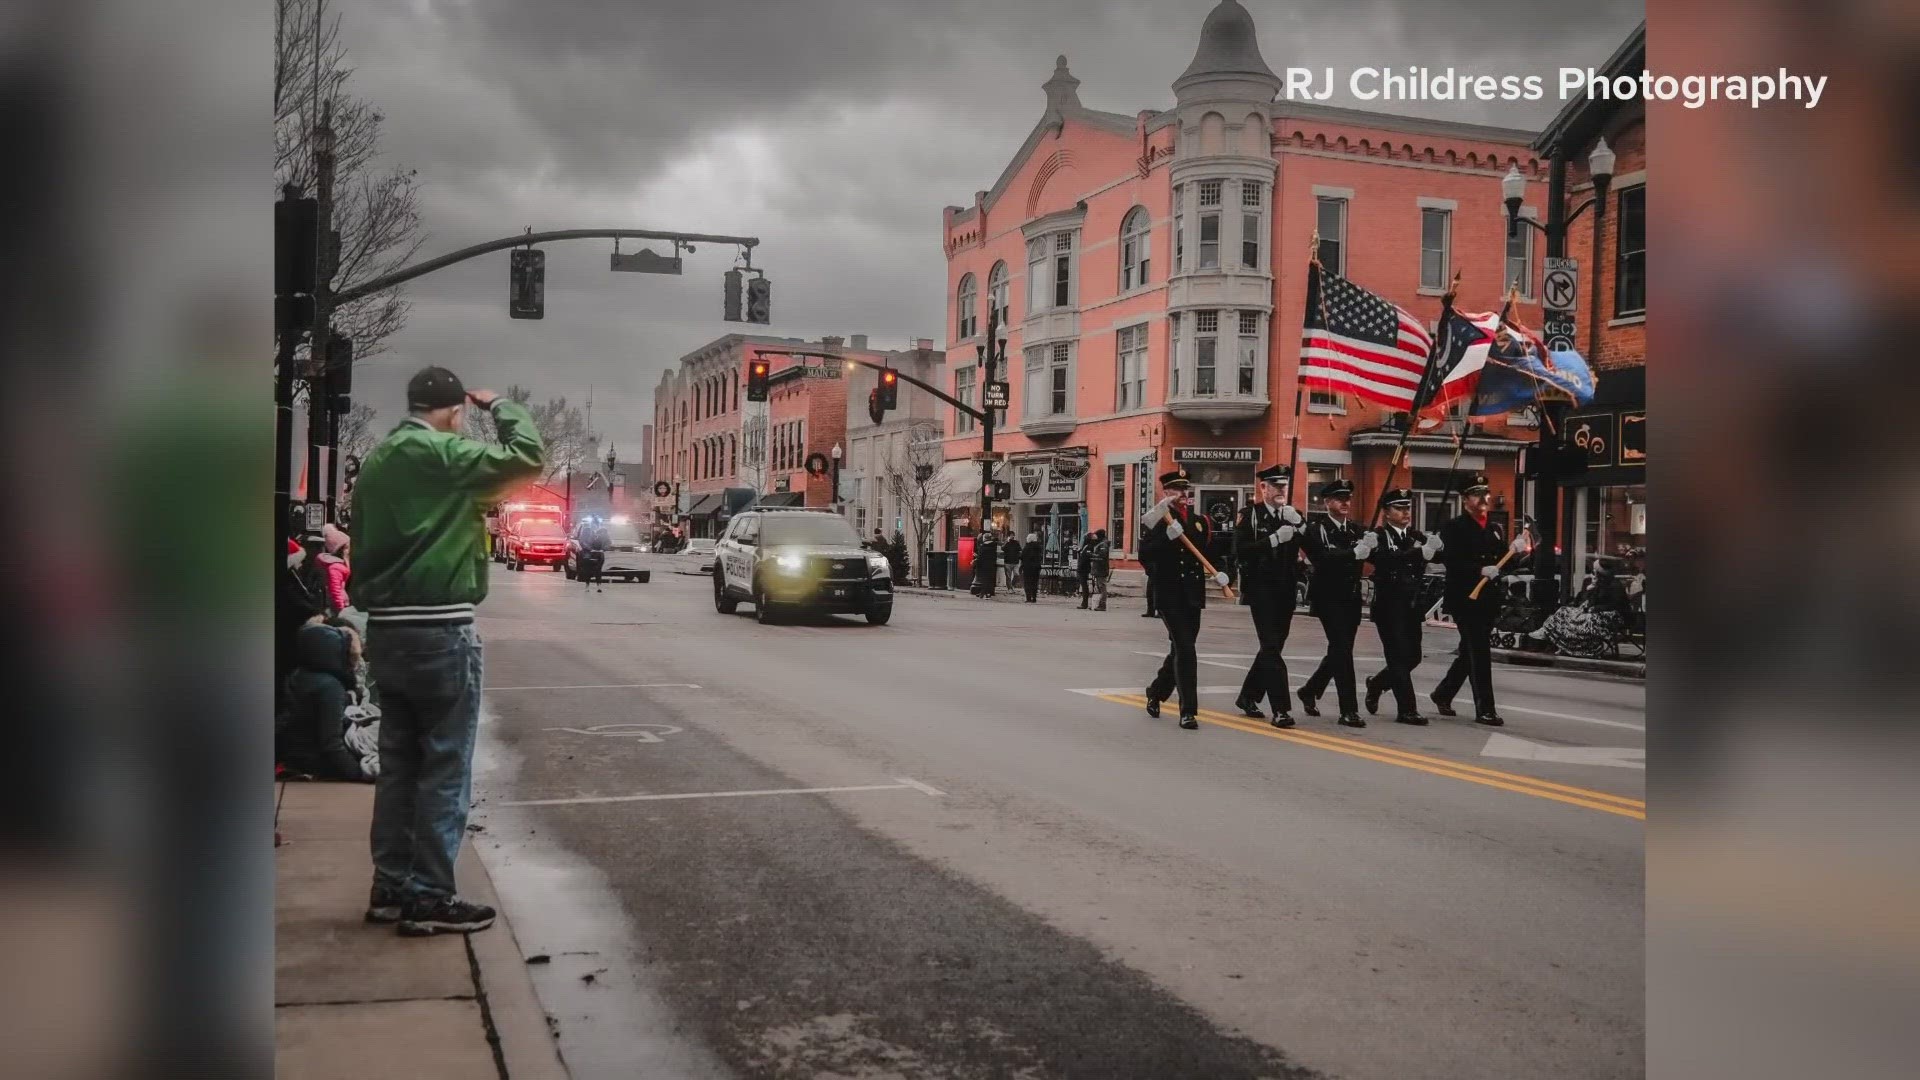 A Westerville photographer is on the hunt to find a man, believed to be a veteran, who he captured in a photograph during the Westerville Christmas parade last week.